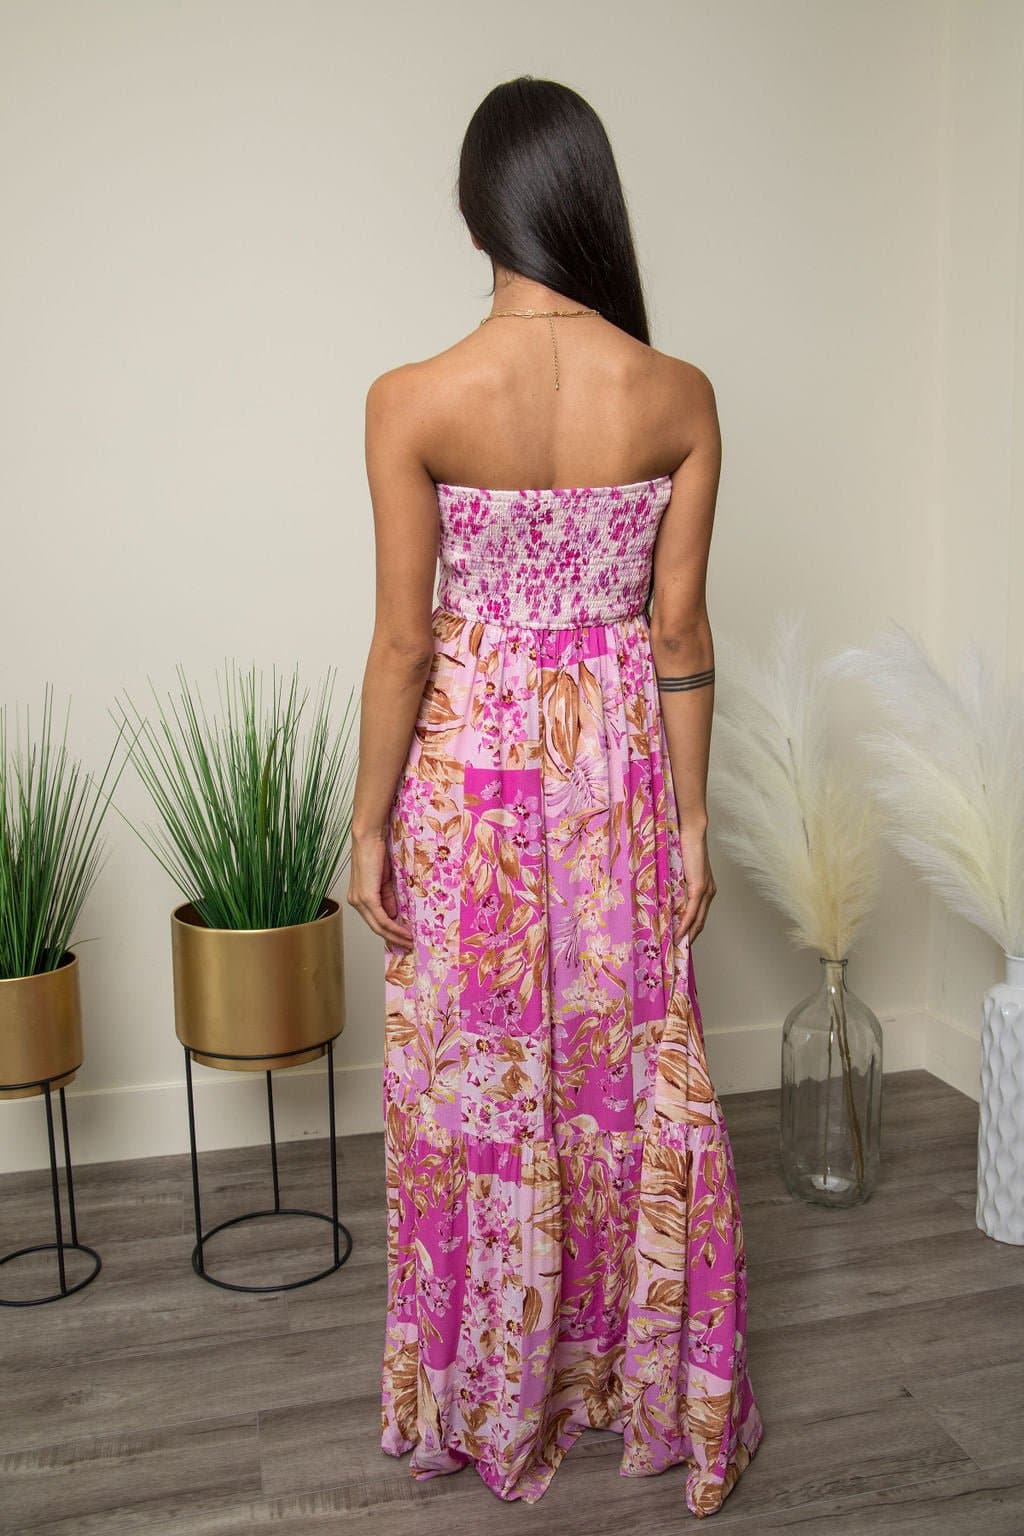 Cotton Candy Ruffle Floral Print Maxi Dress -Pink - AVAH